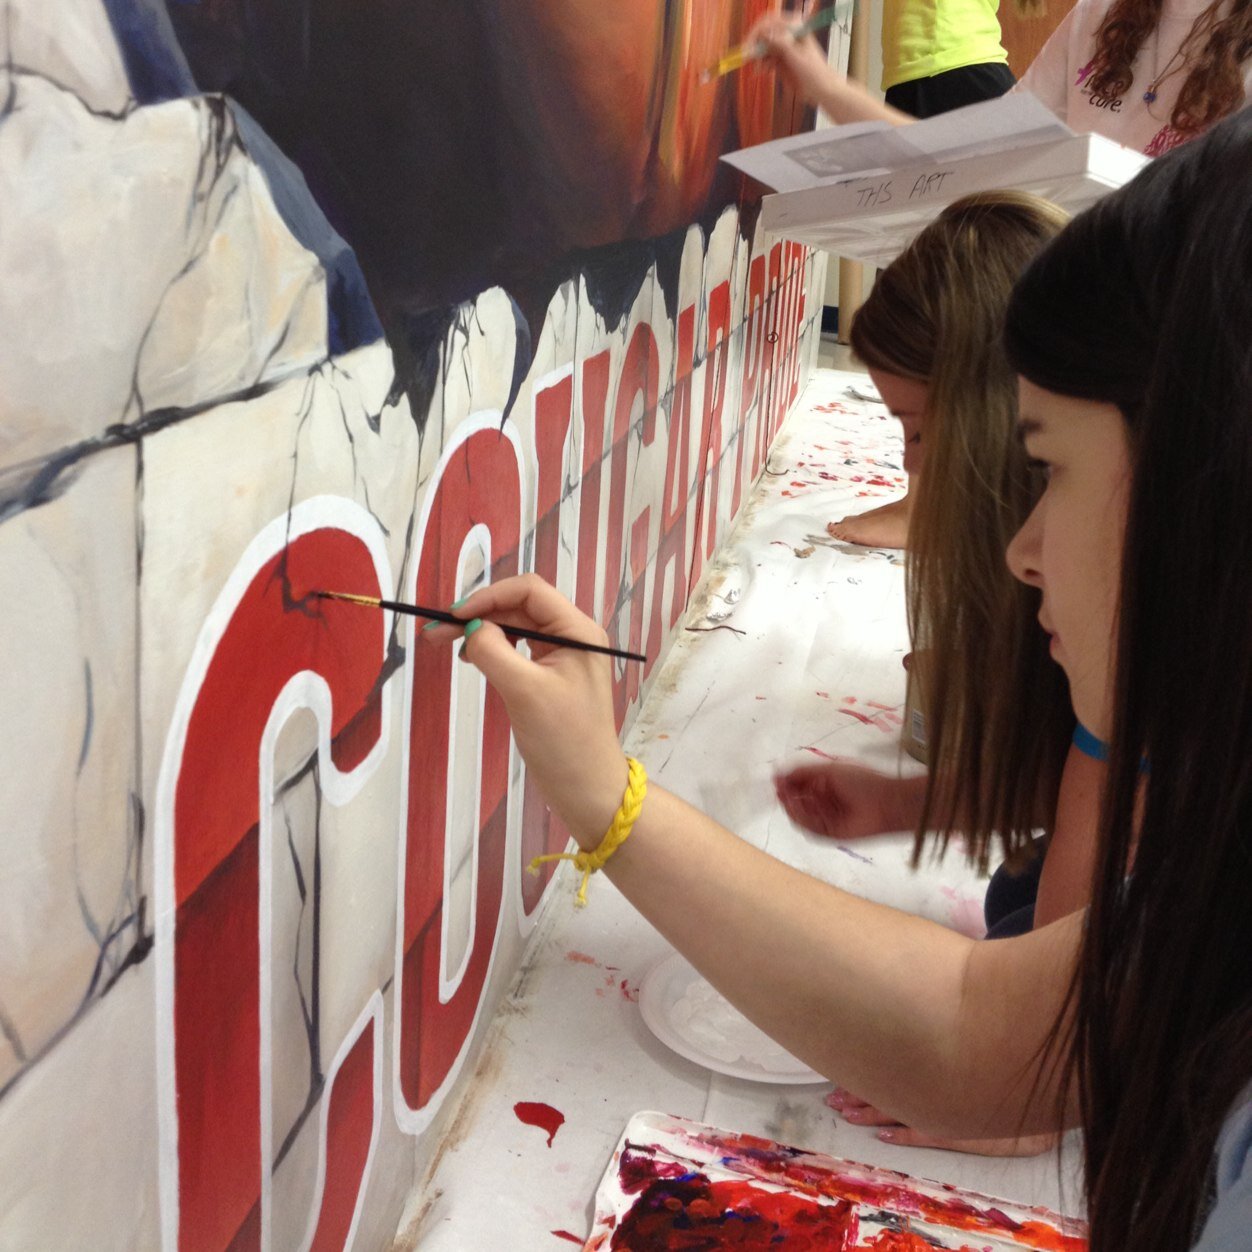 The Tomball High School Art Department is dedicated to providing our students with artistic experiences ground in creativity, integrity, and innovation.